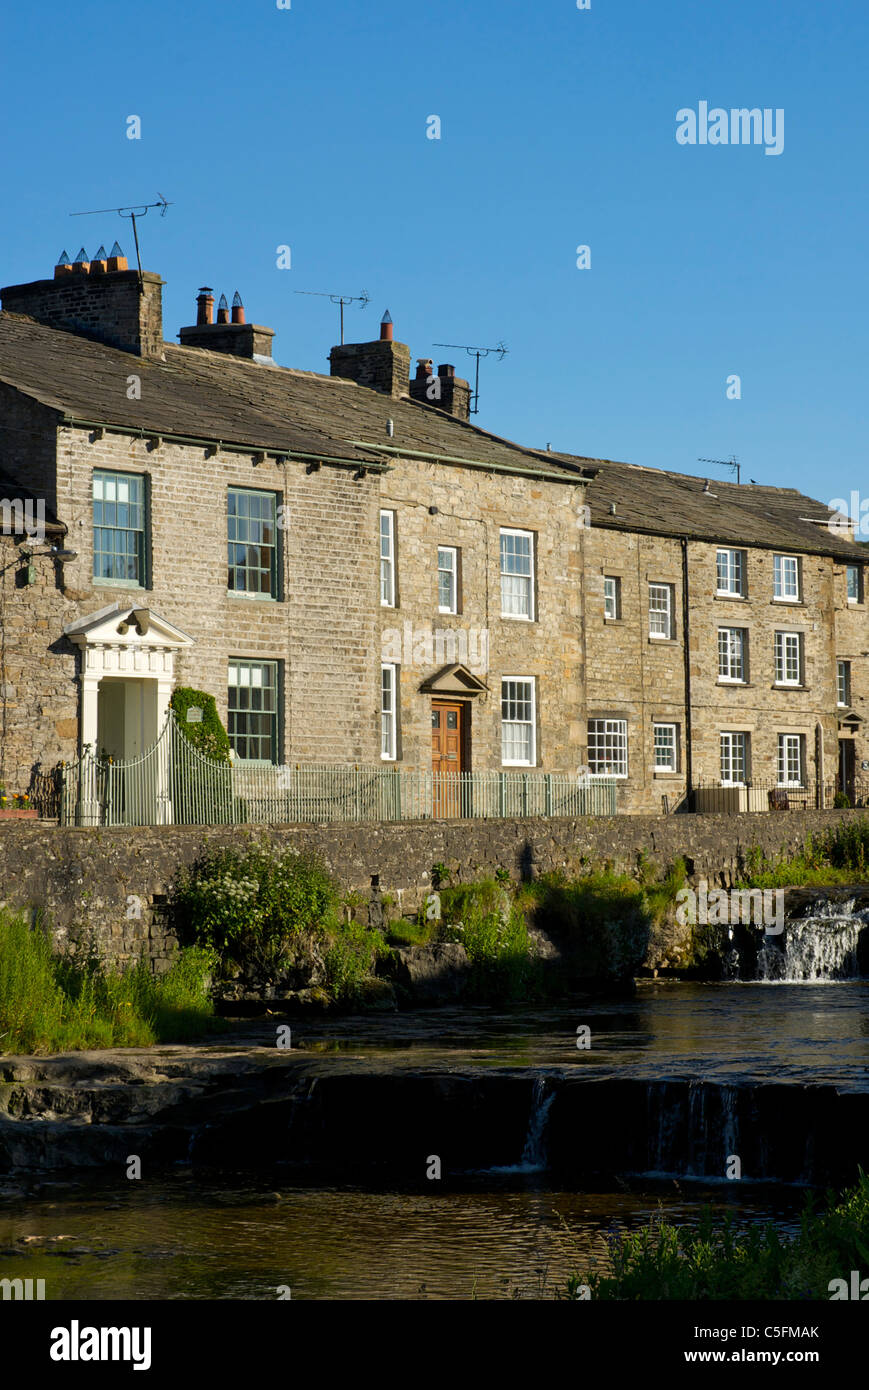 Houses in the village of Gayle, overlooking Gayle Beck, near Hawes, Wensleydale, Yorkshire Dales National Park, England UK Stock Photo